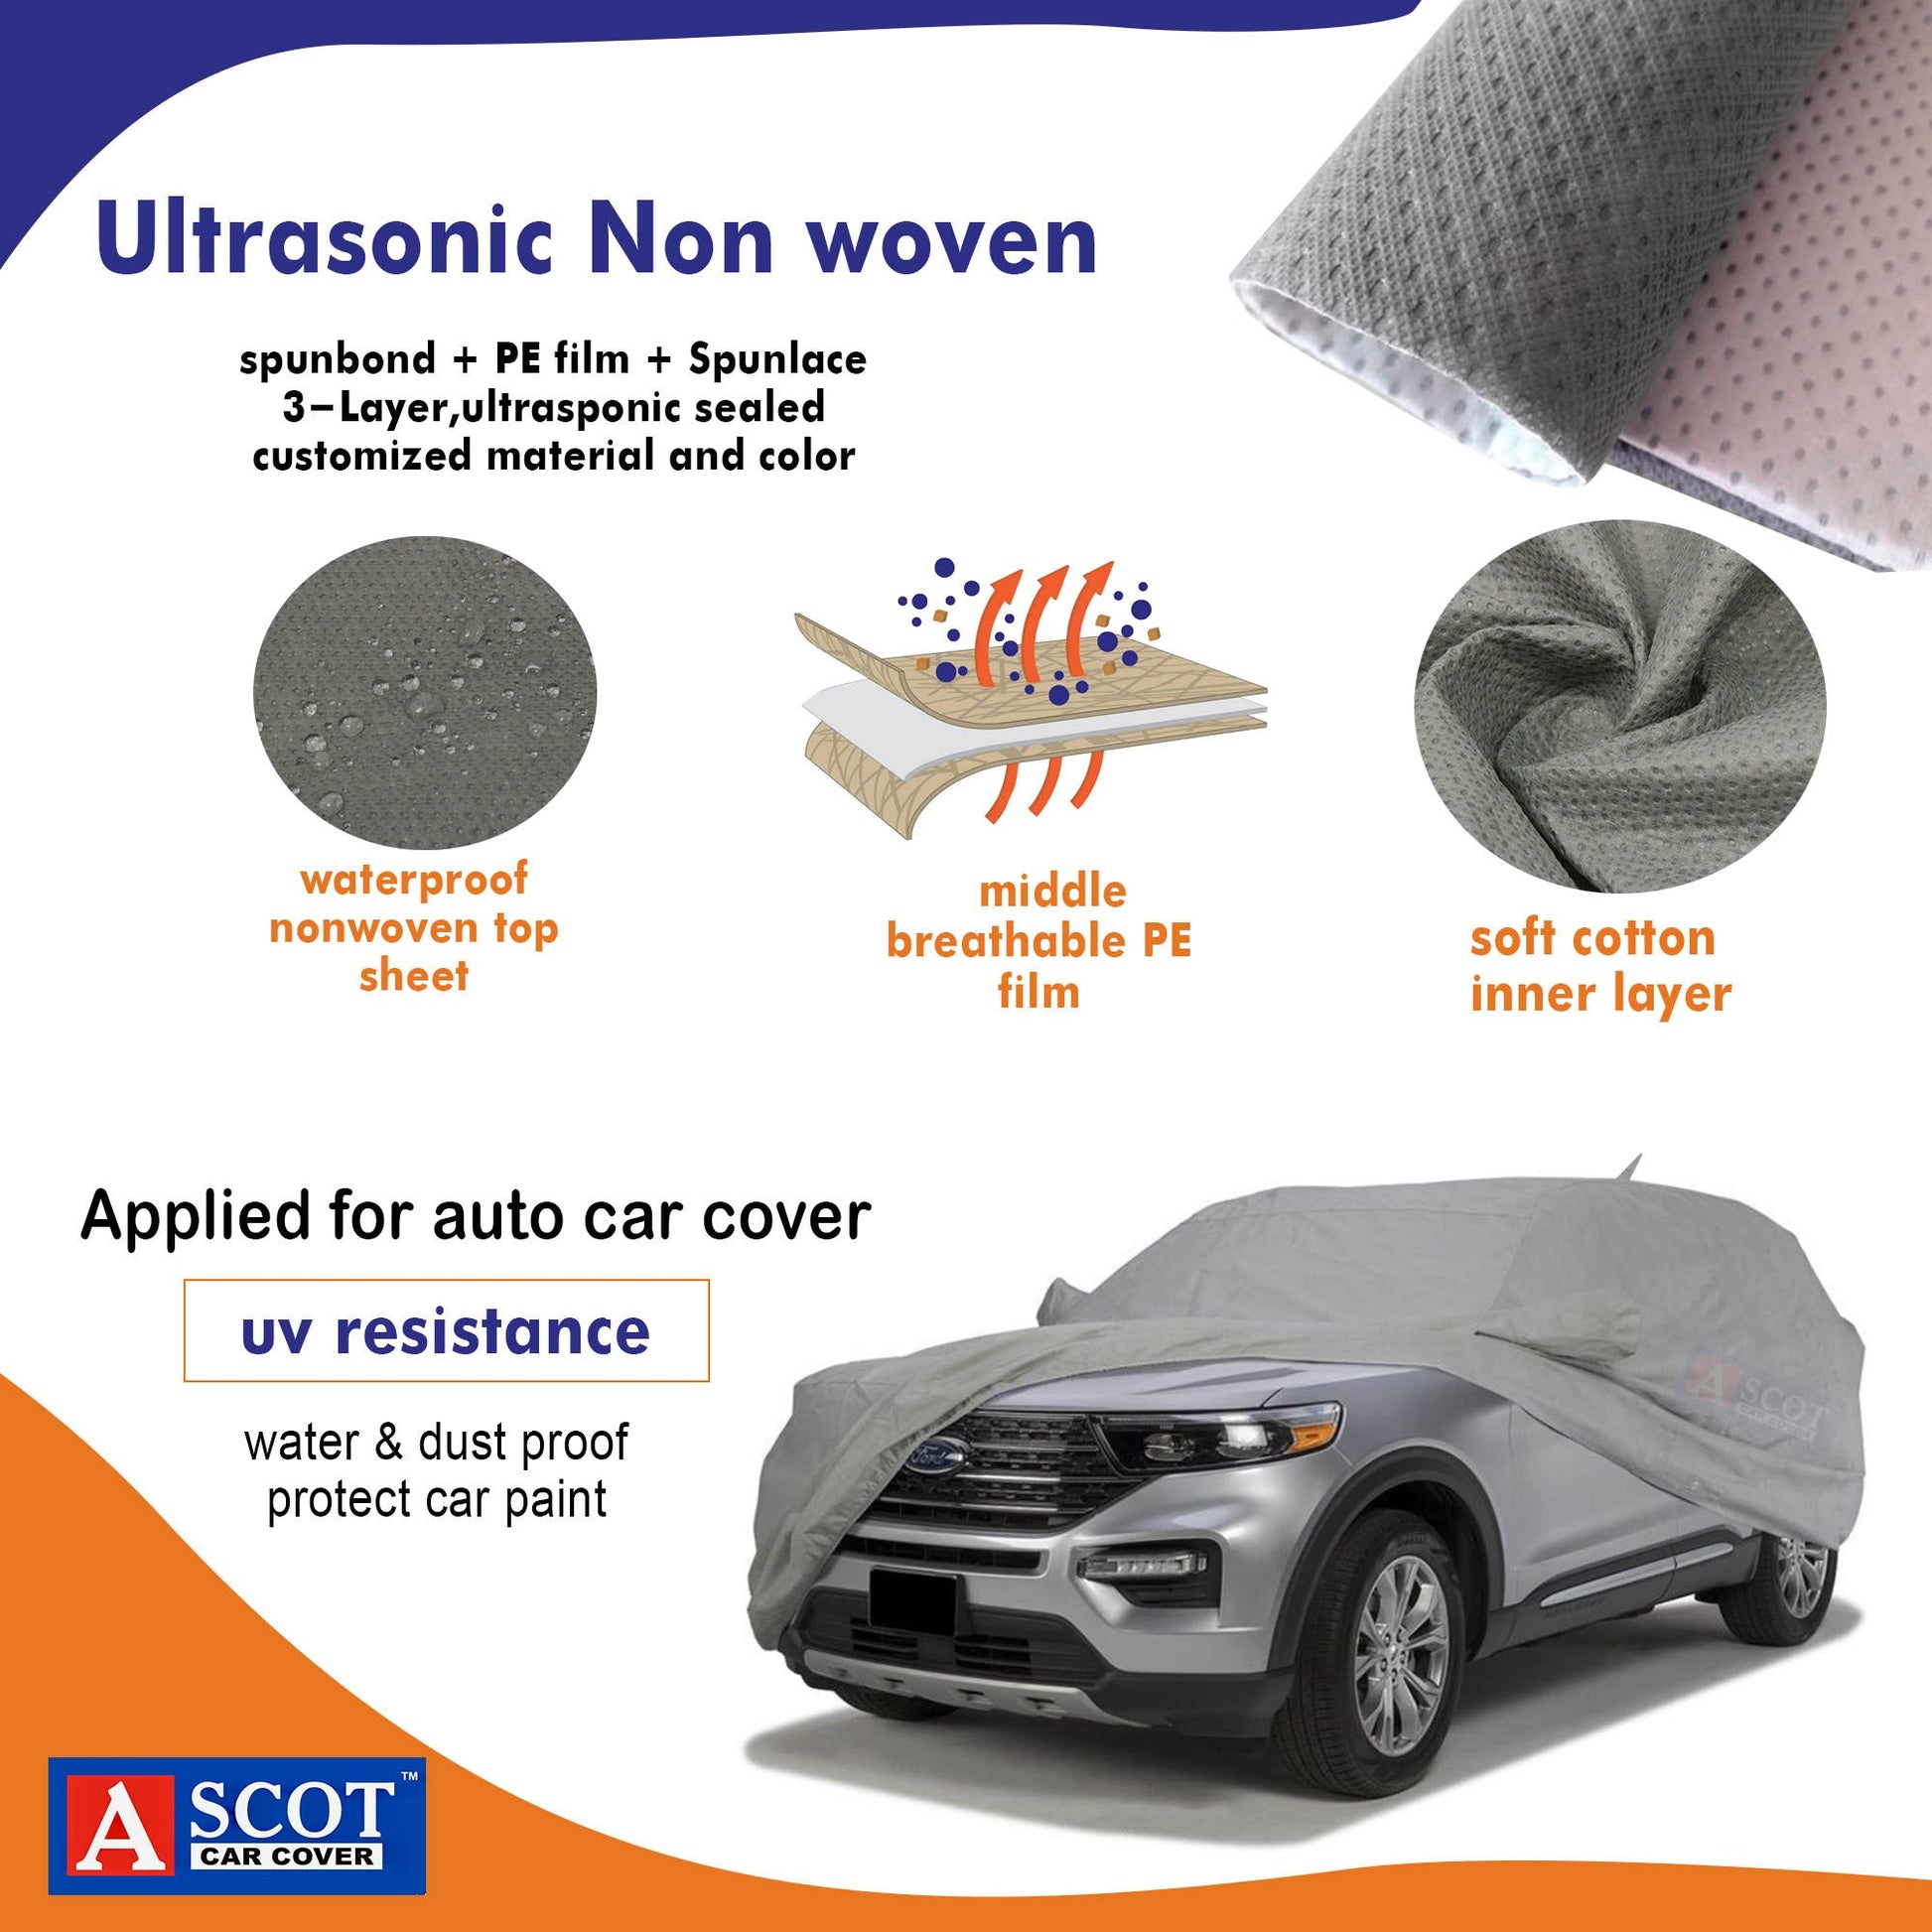 Ascot car cover blocks moisture, allows moisture vapor and heat to escape, breathable film inner layer